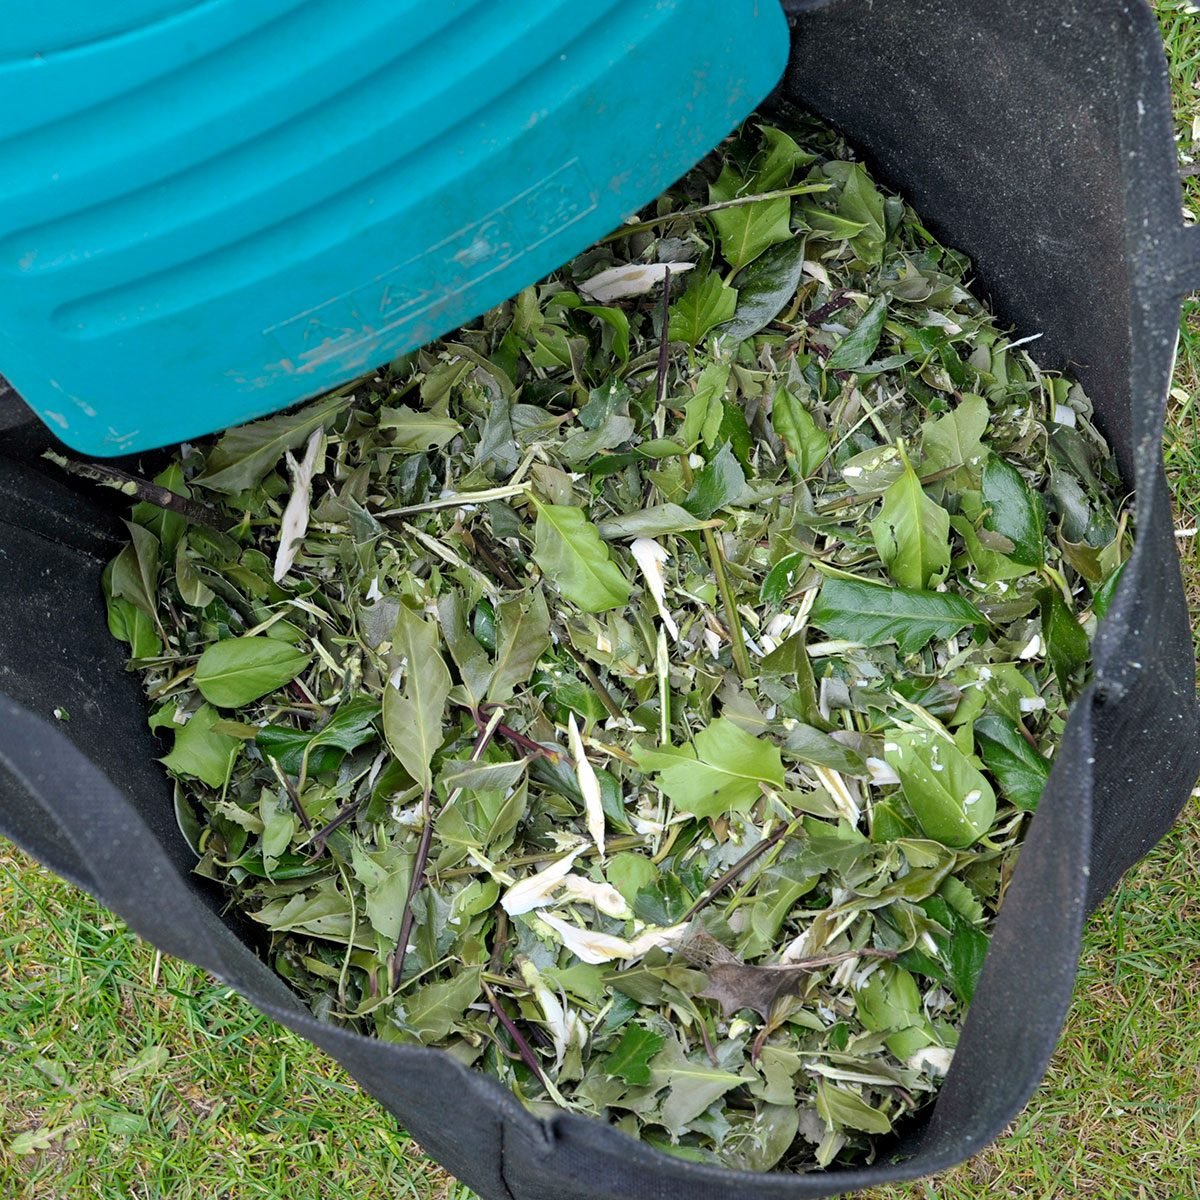 What Is Leaf Mulch and How To Make It